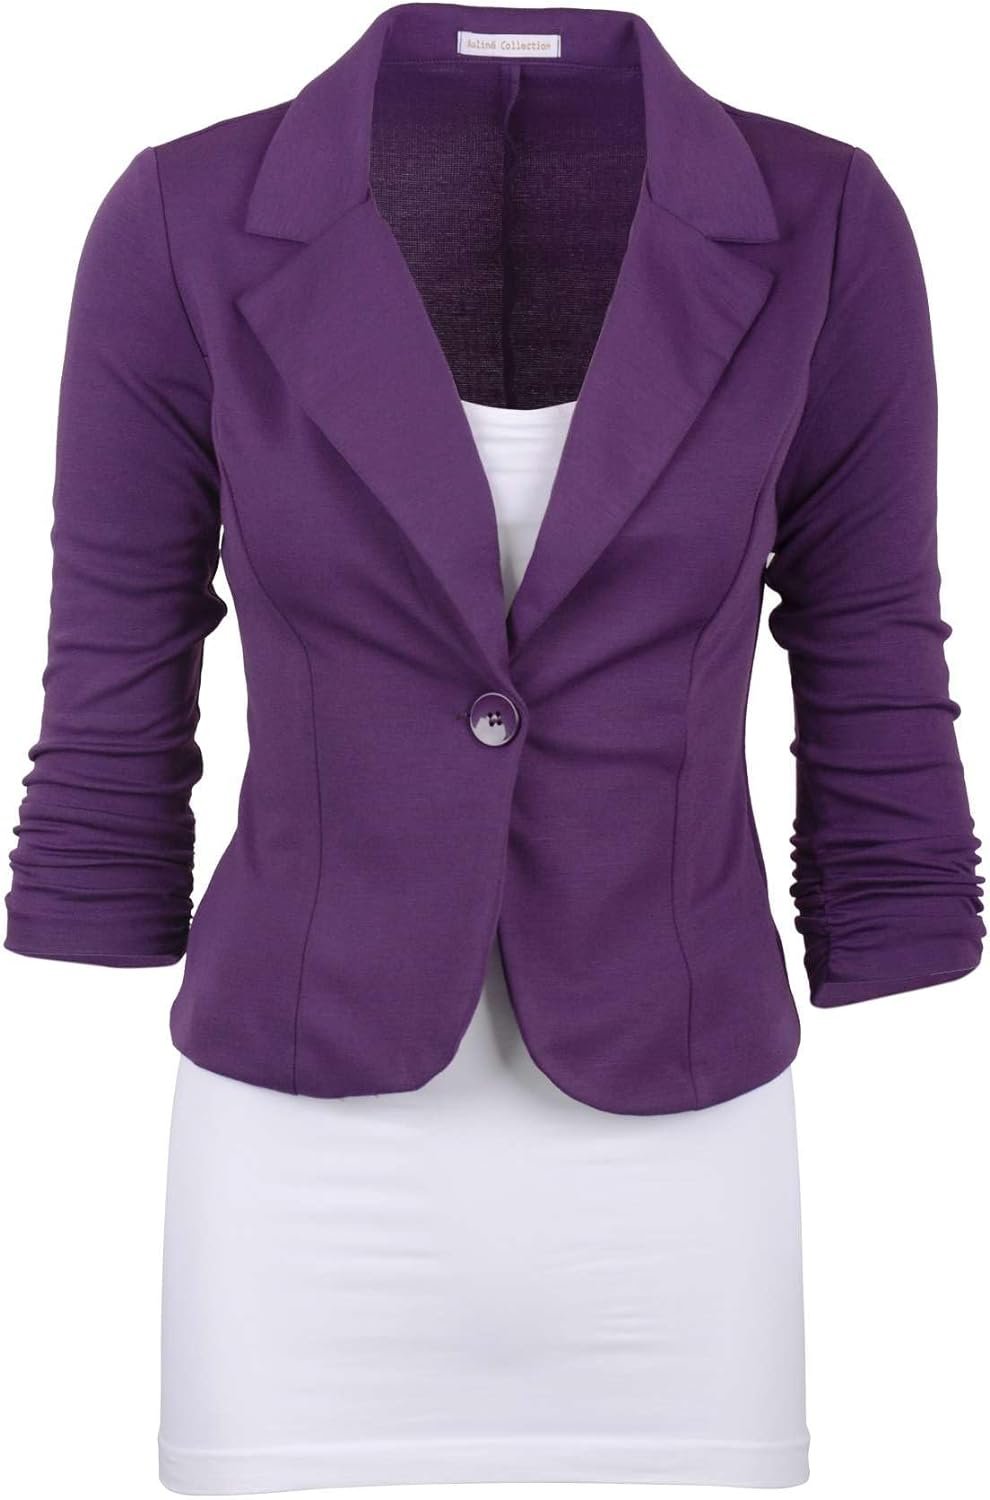 Auliné Collection Womens Casual Work Solid Color Knit Blazer